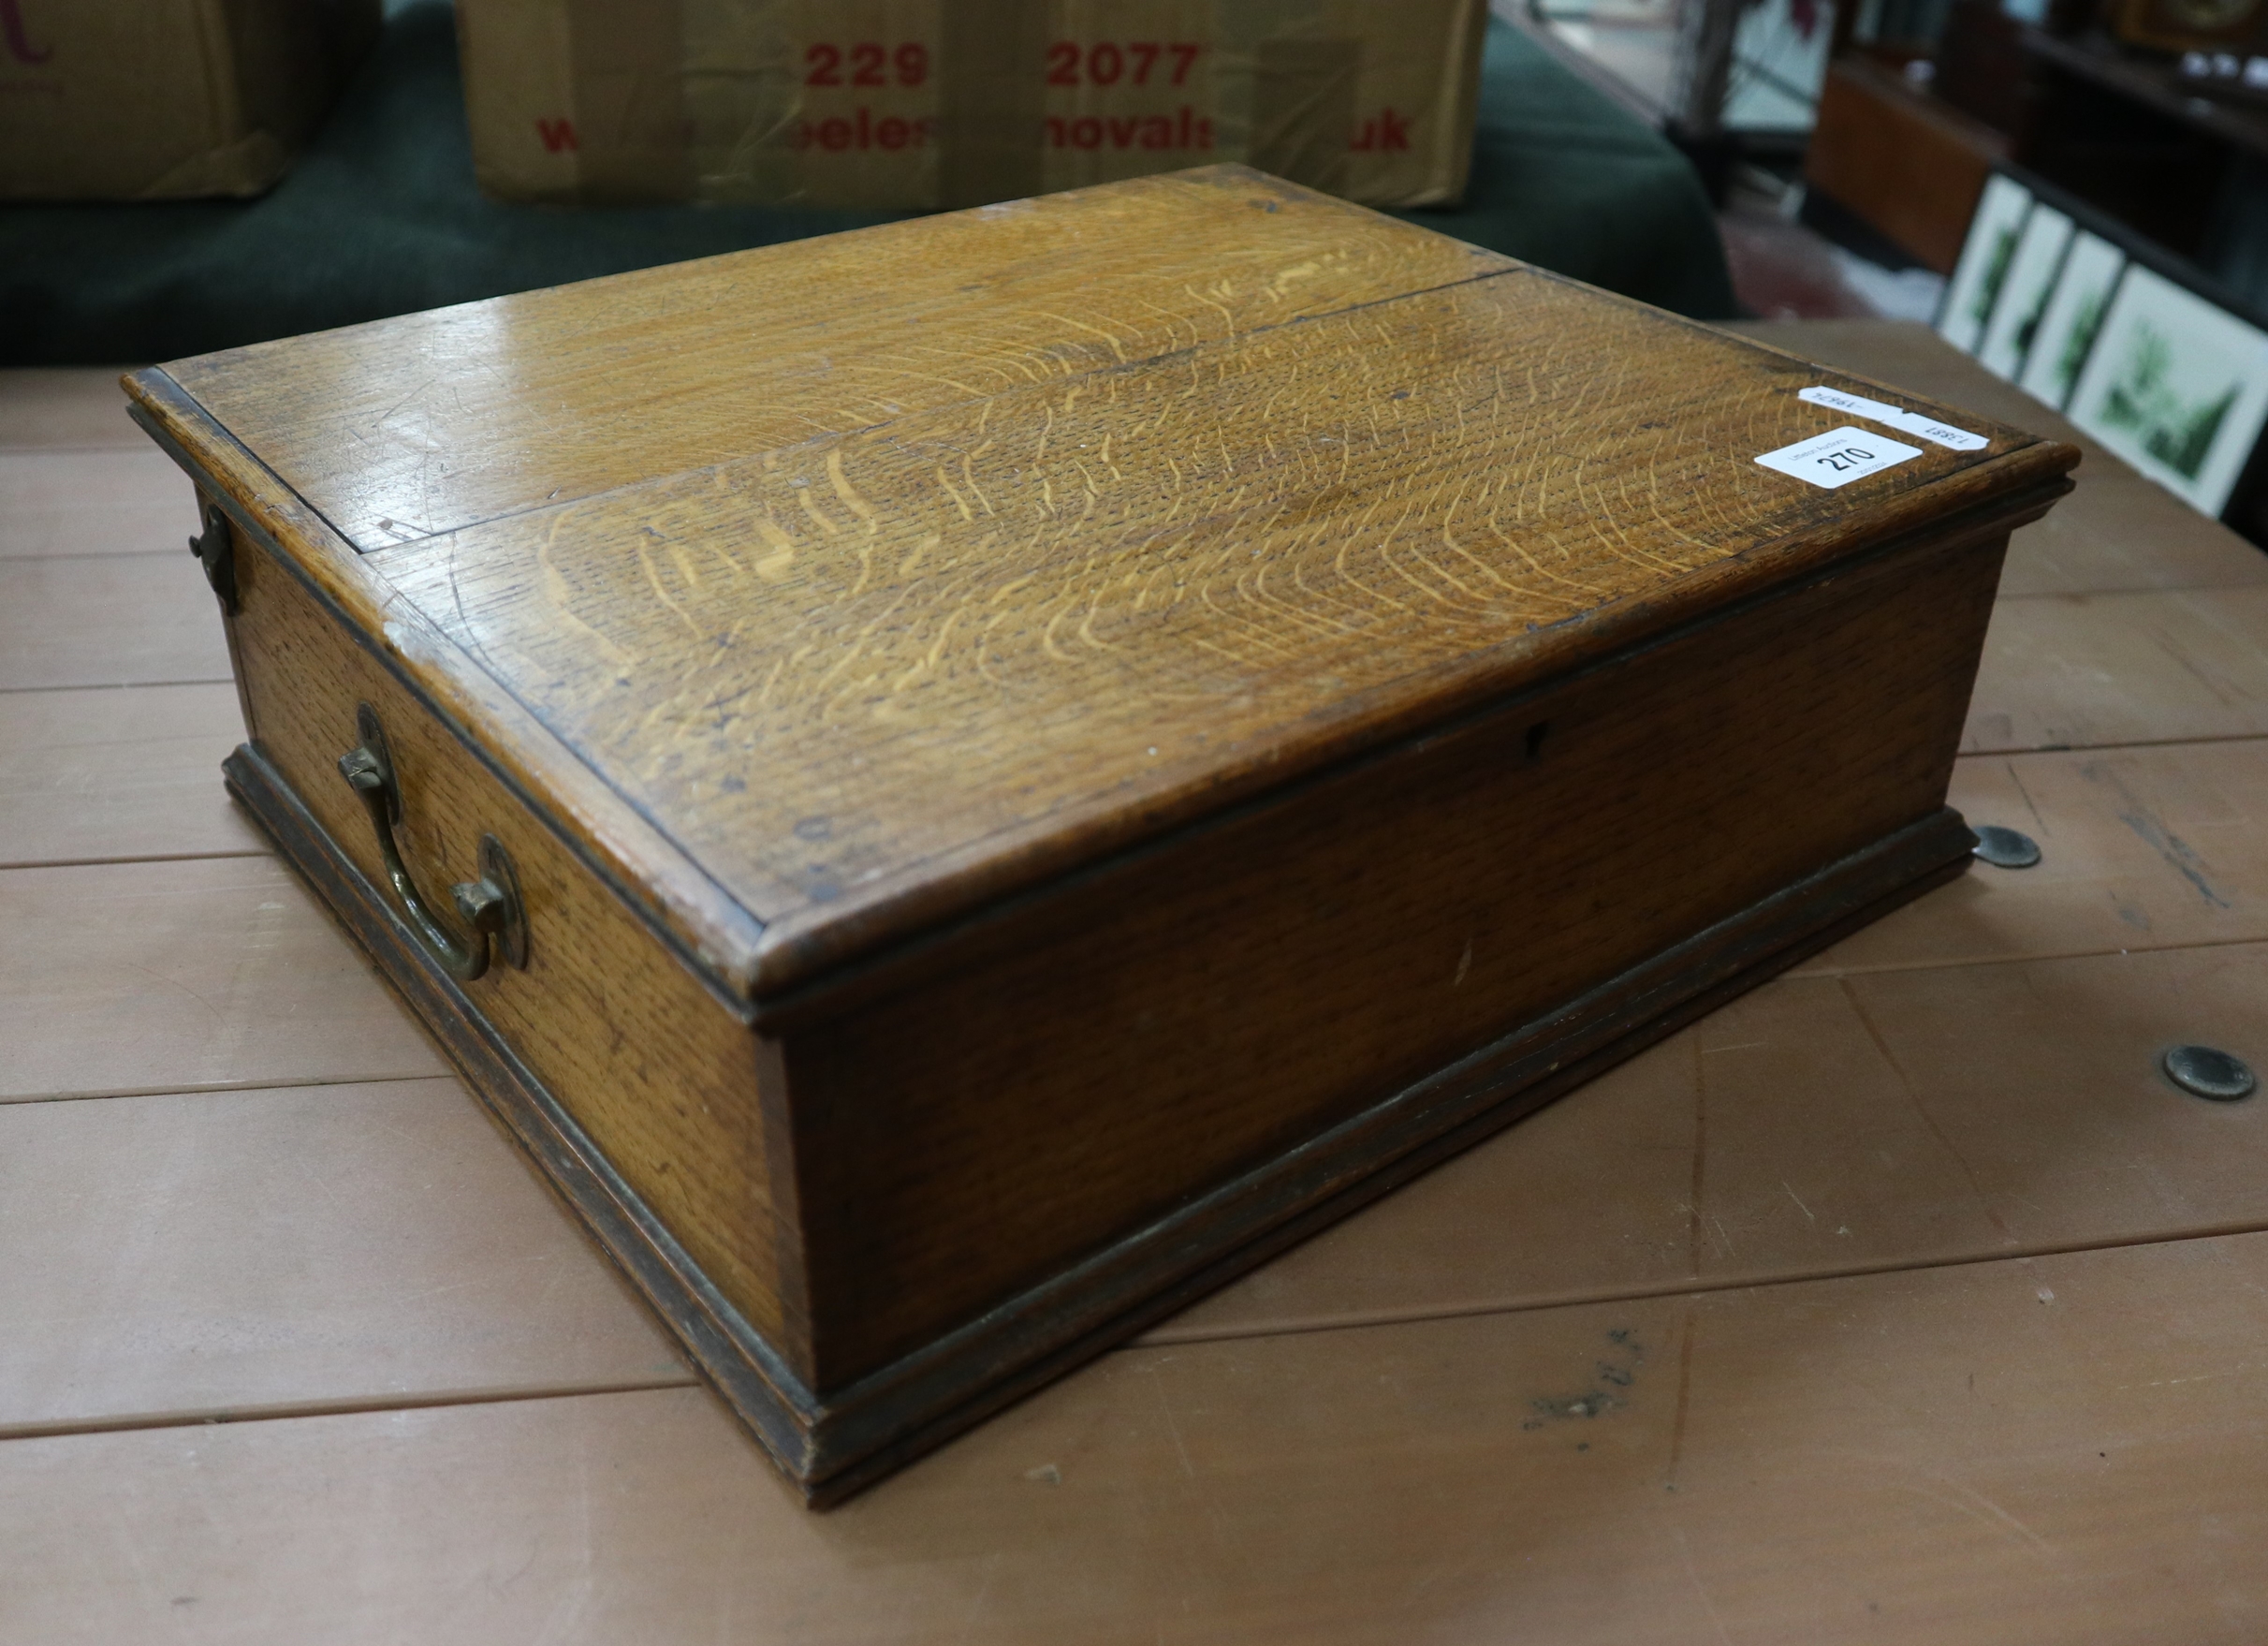 Bible in wooden box dated 1877 - Image 3 of 3